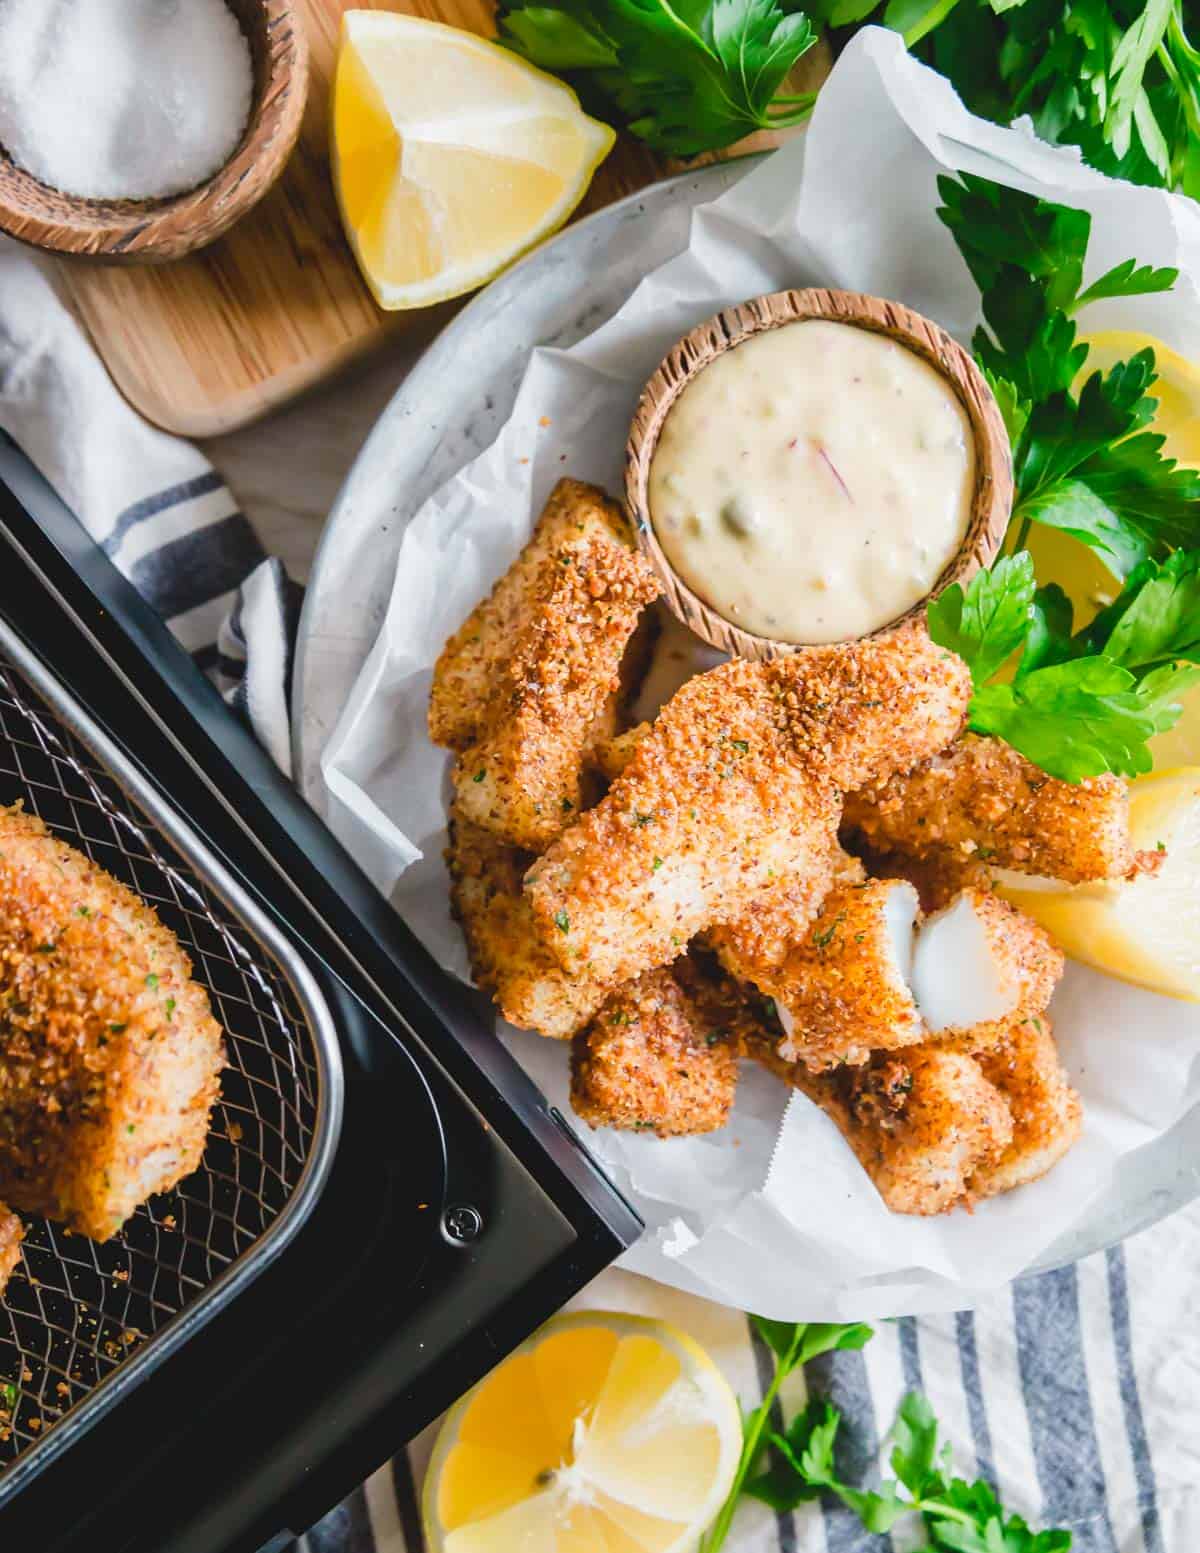 Easy air fryer fish sticks are served with lemon wedges, fresh parsley and an easy dijon remoulade sauce for dipping.